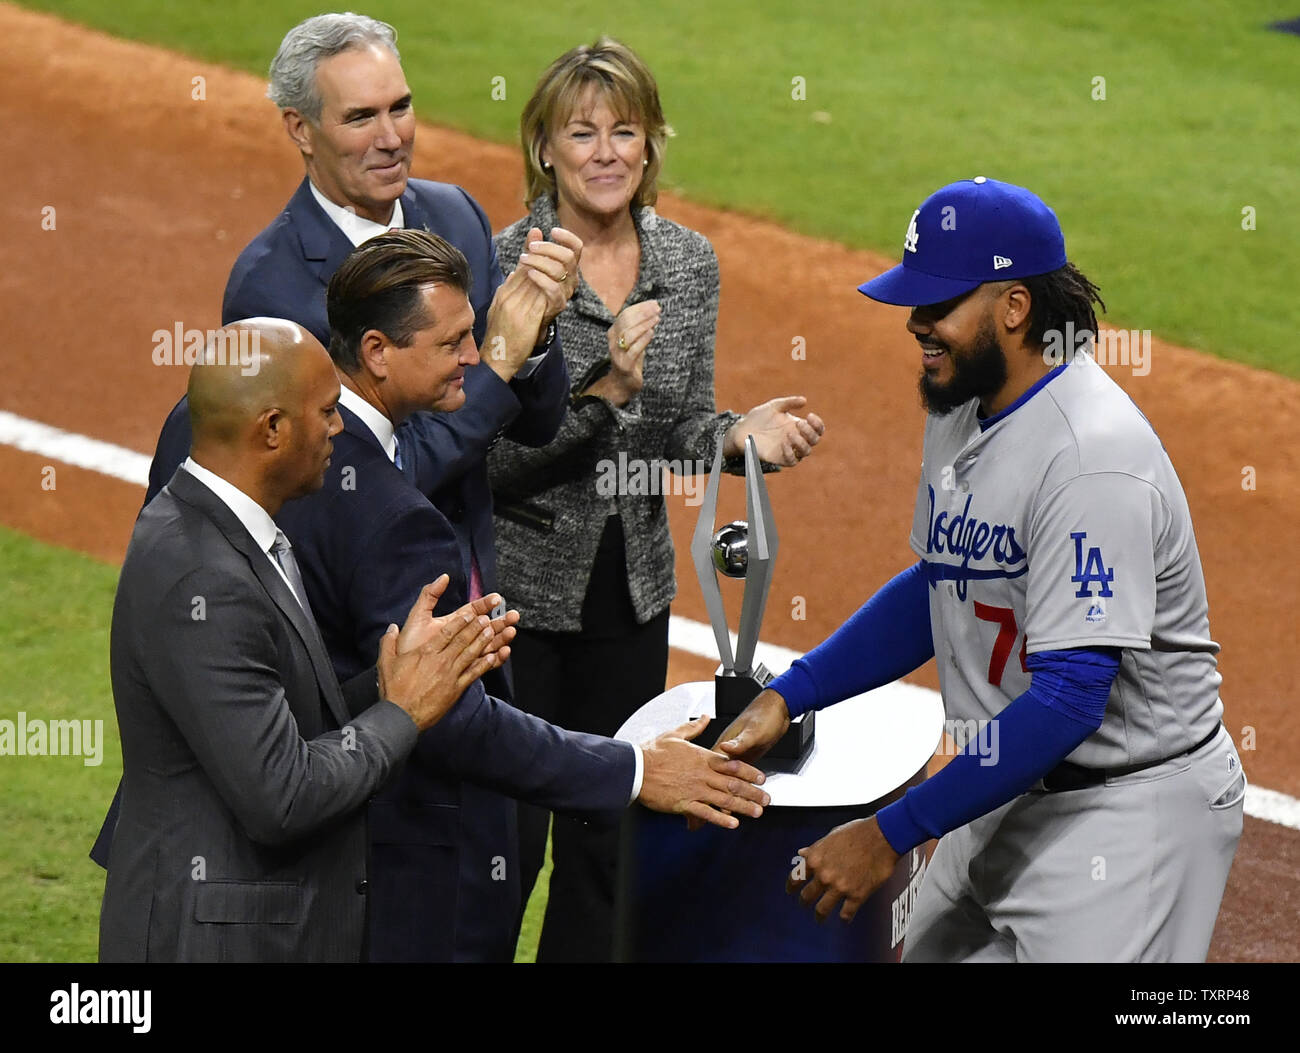 Photo: Dodgers Jansen receives Reliever of the Year award at the World  Series - HOU2017102802 